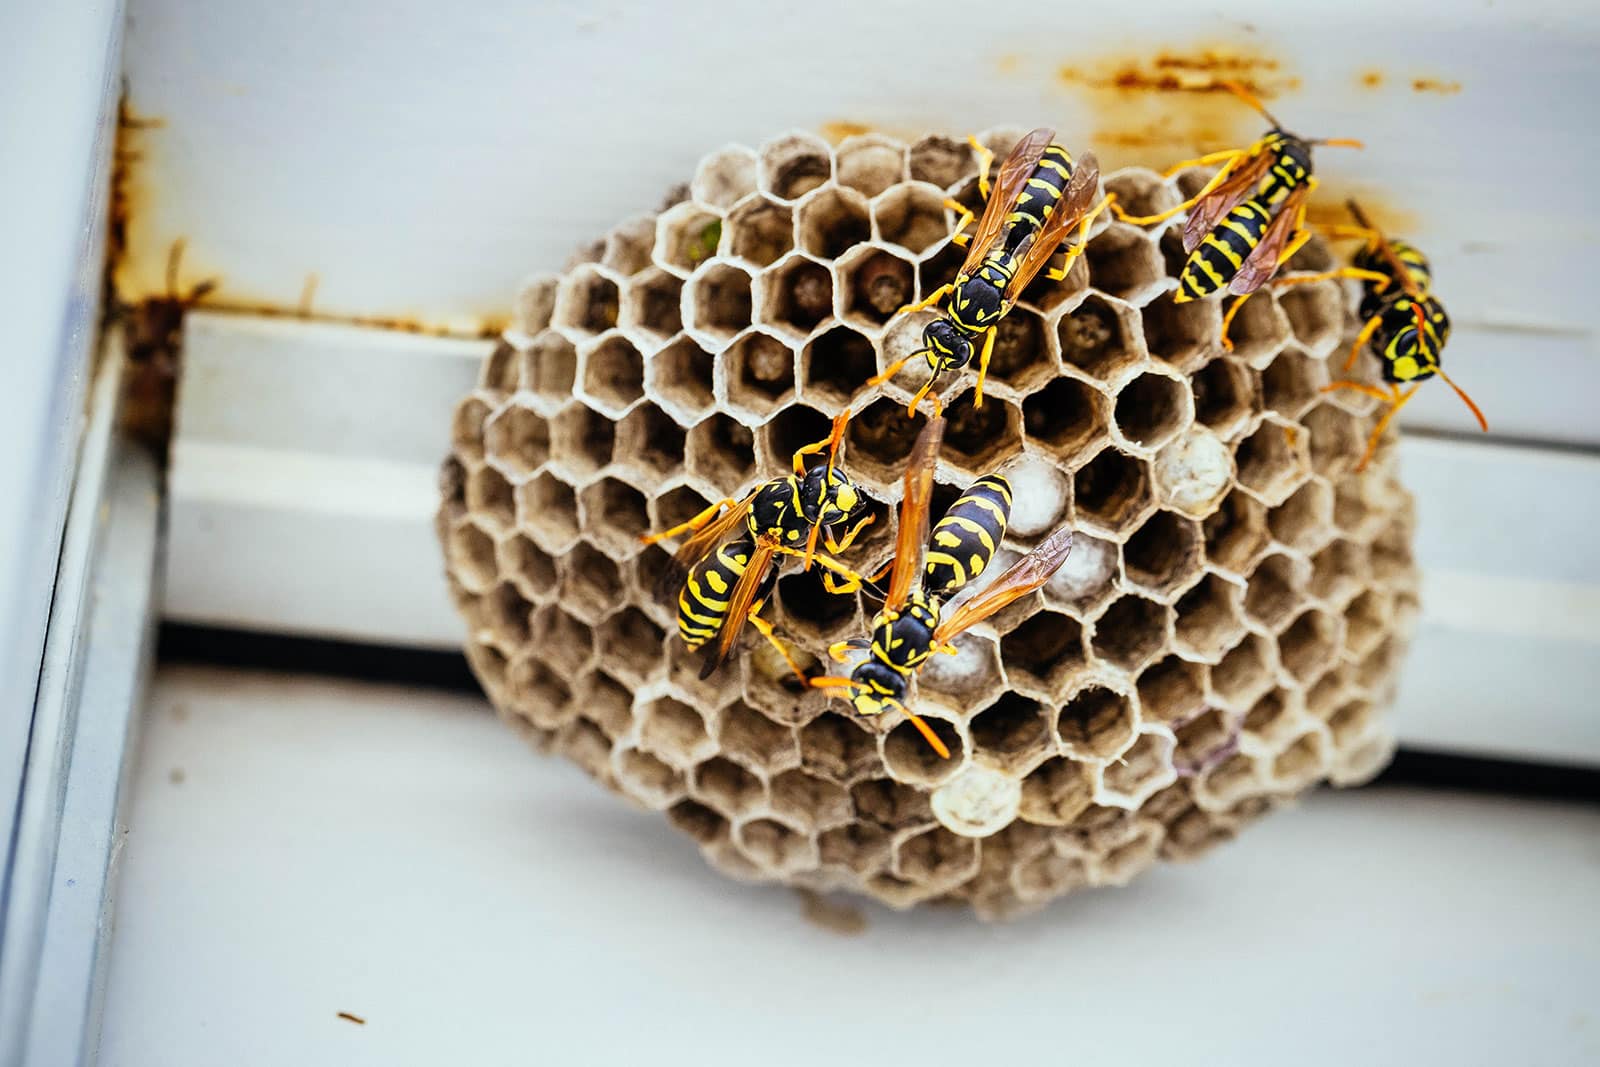 Yellowjackets building the cells of their honeycomb-shaped wasp nest